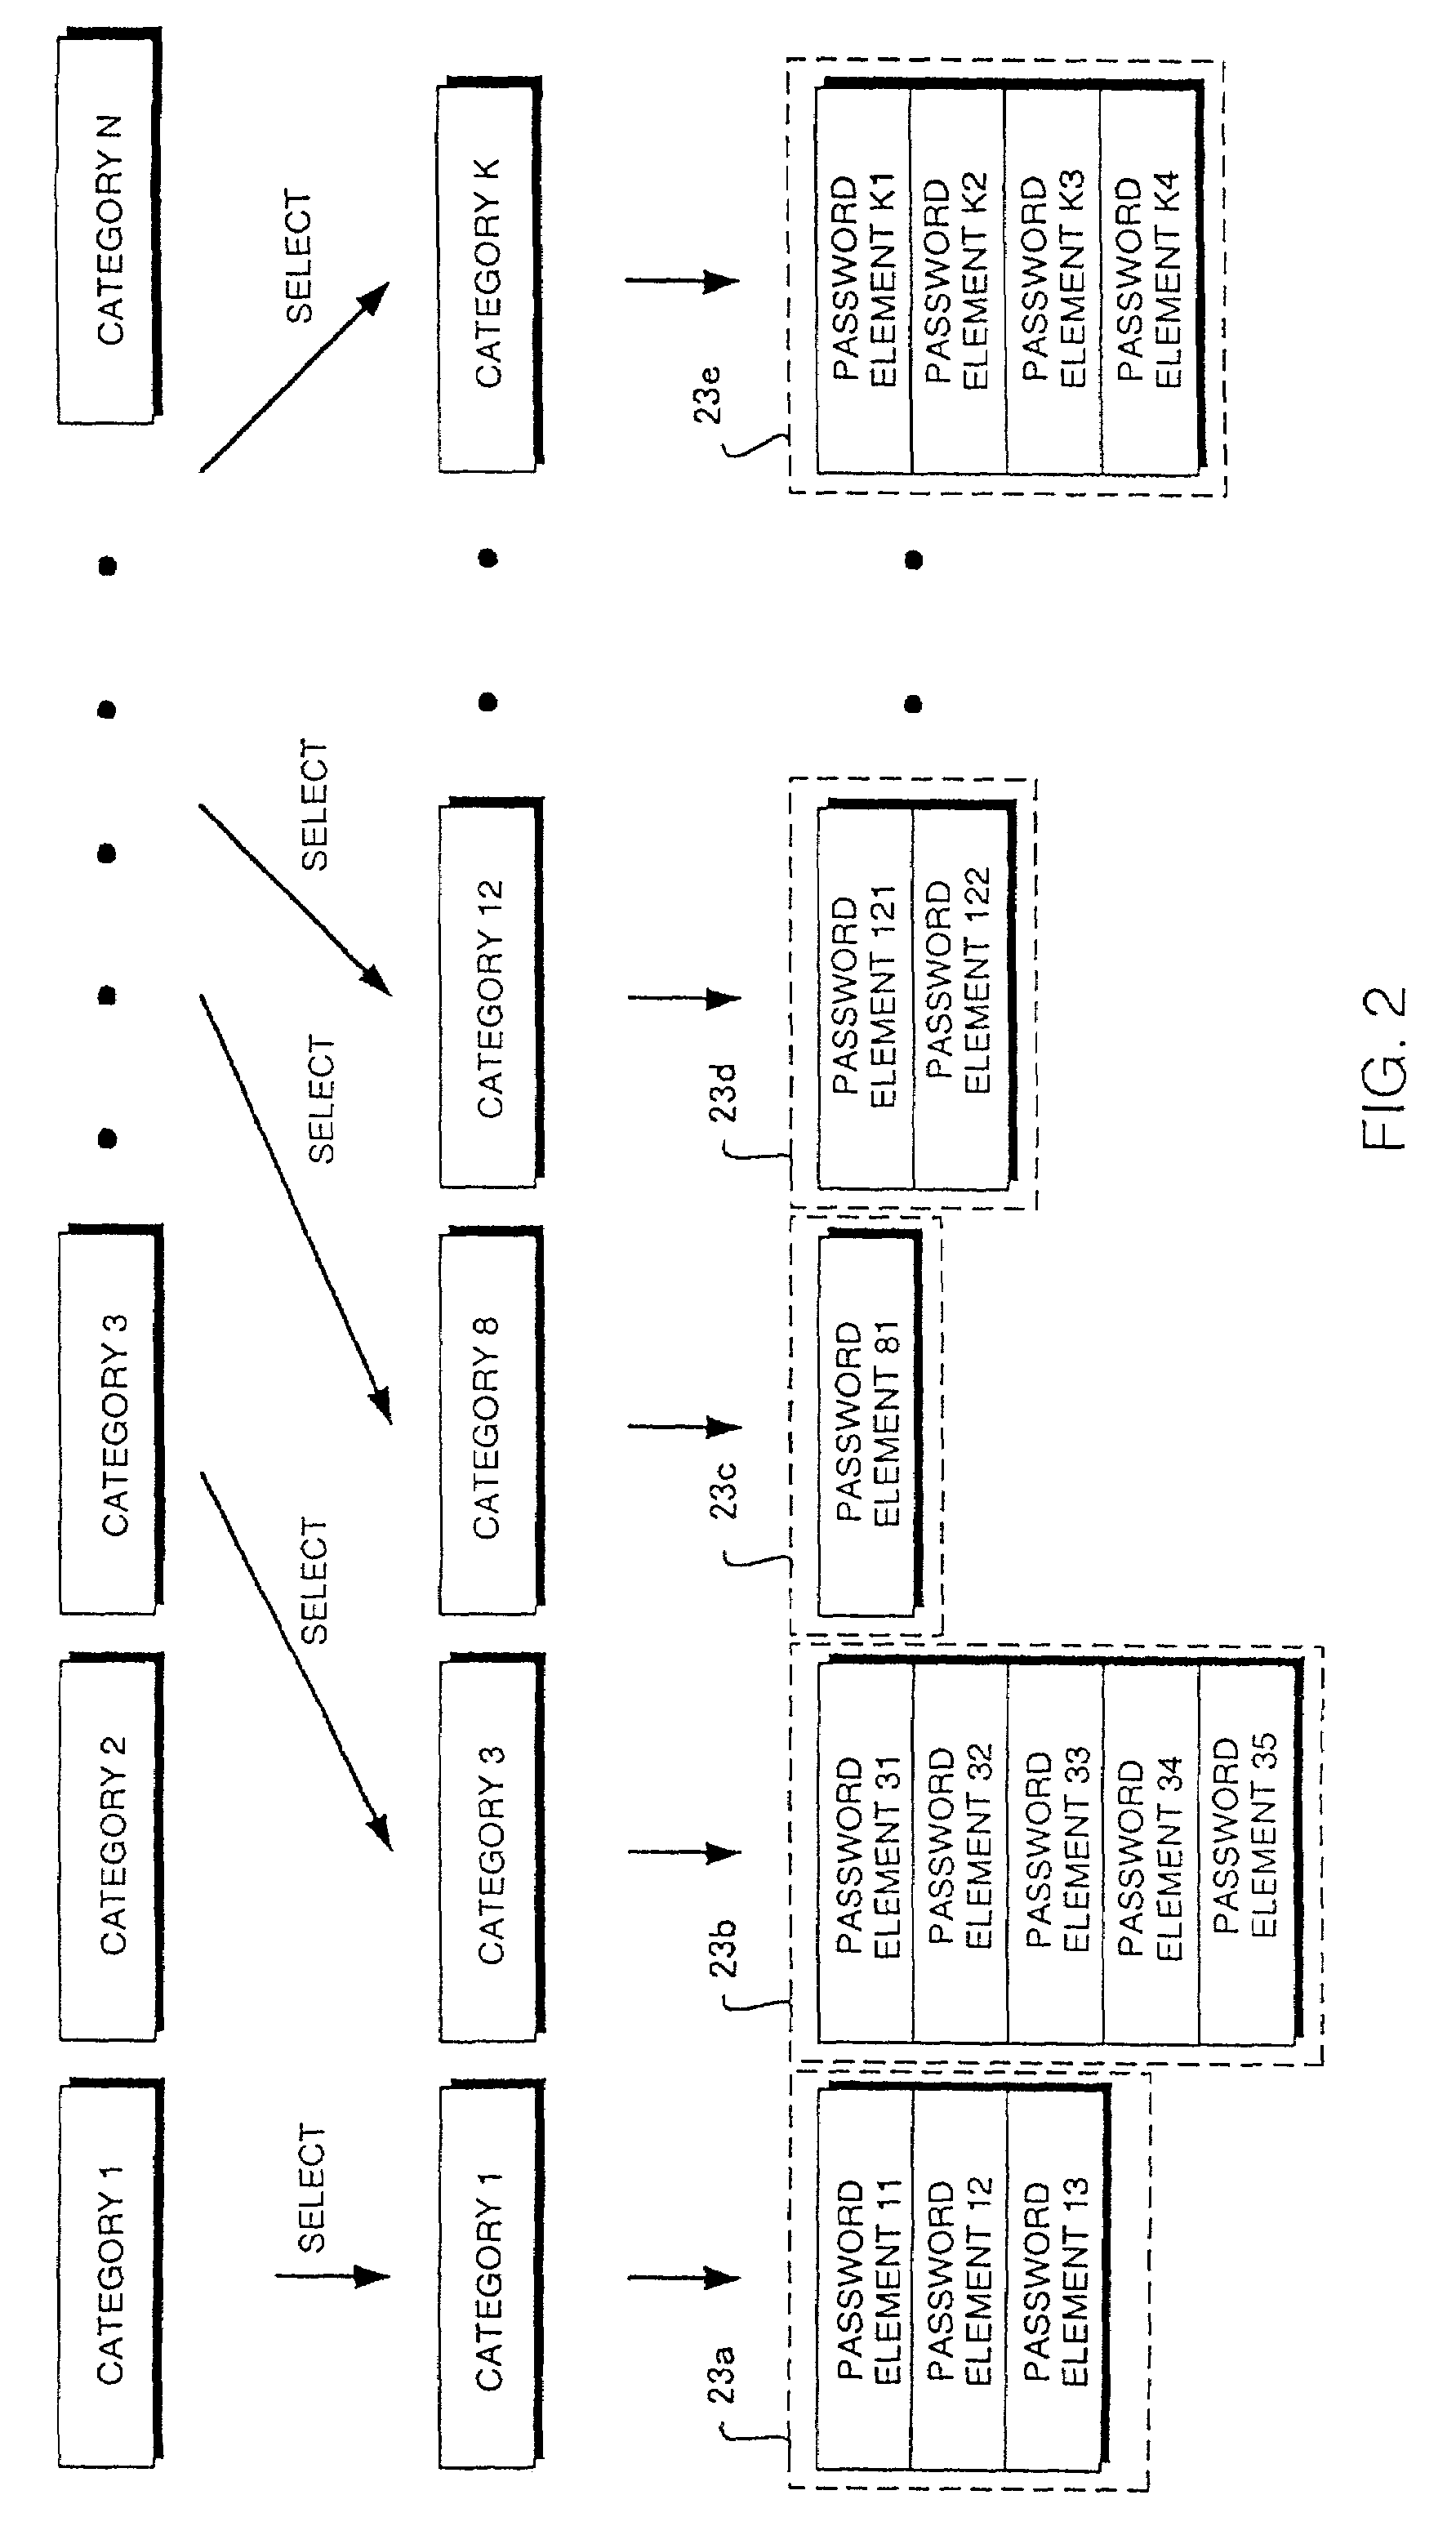 Password generation and verification system and method therefor